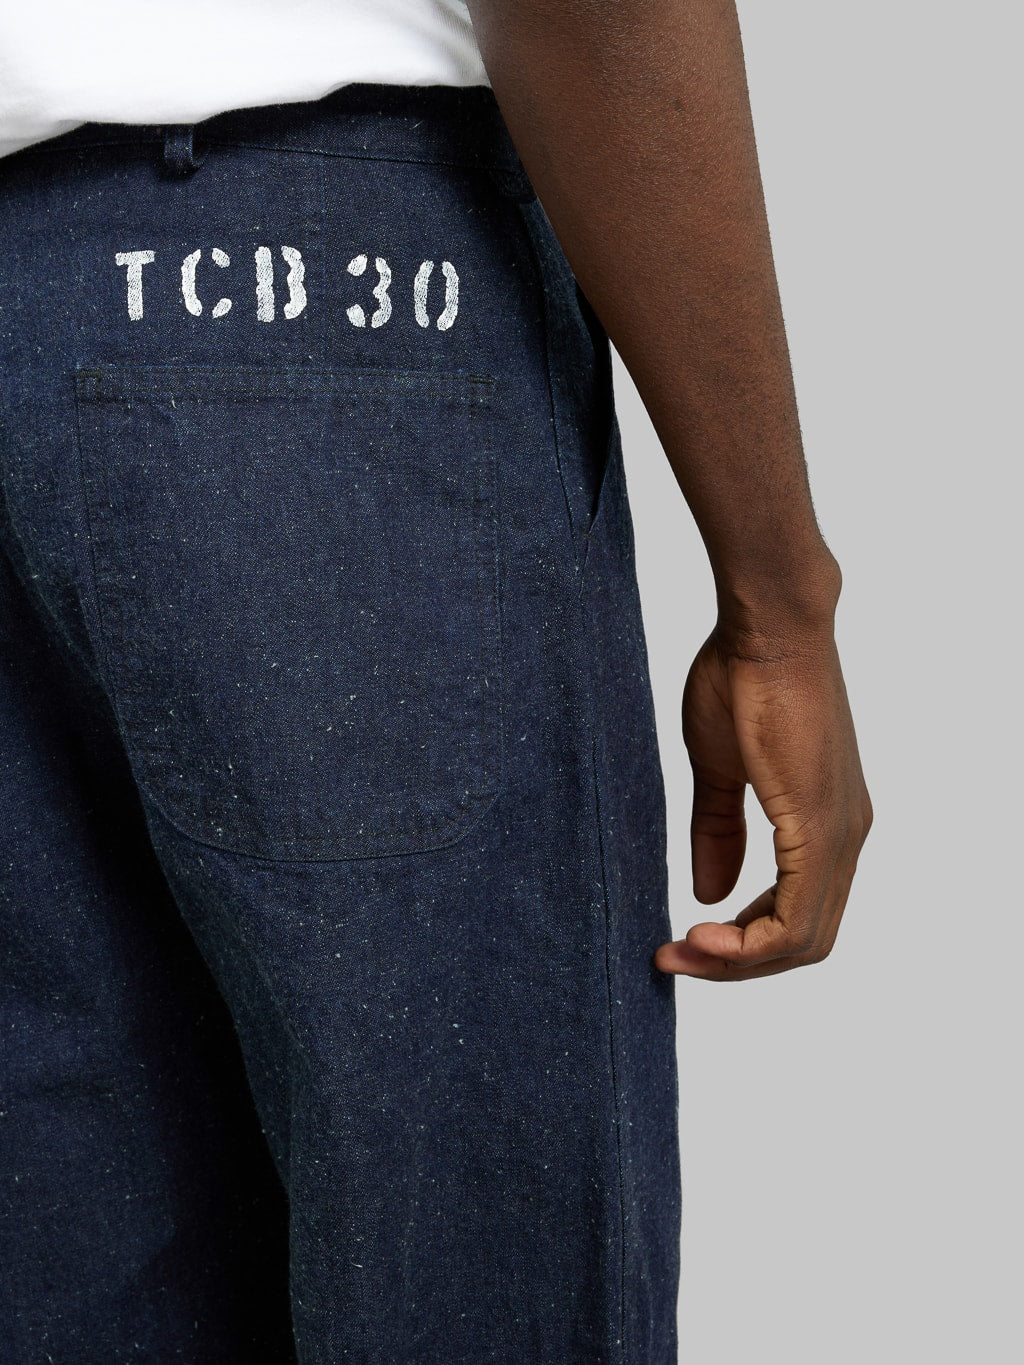 tcb jeans usn seamens denim trousers relaxed high rise